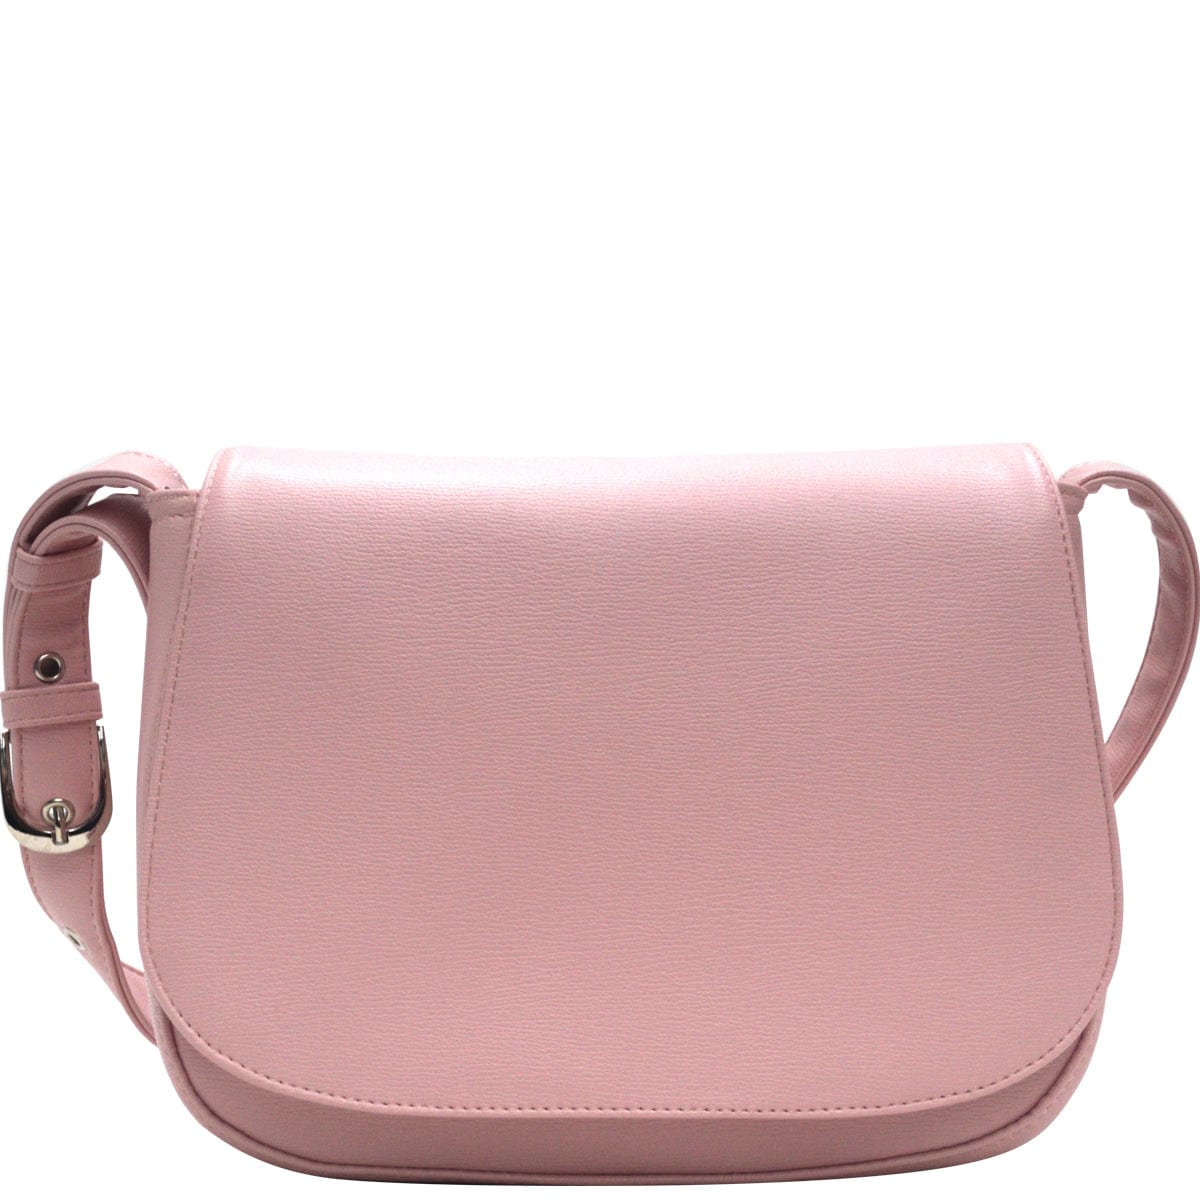 Little Beth Bag - Dusty Pink Leather Look